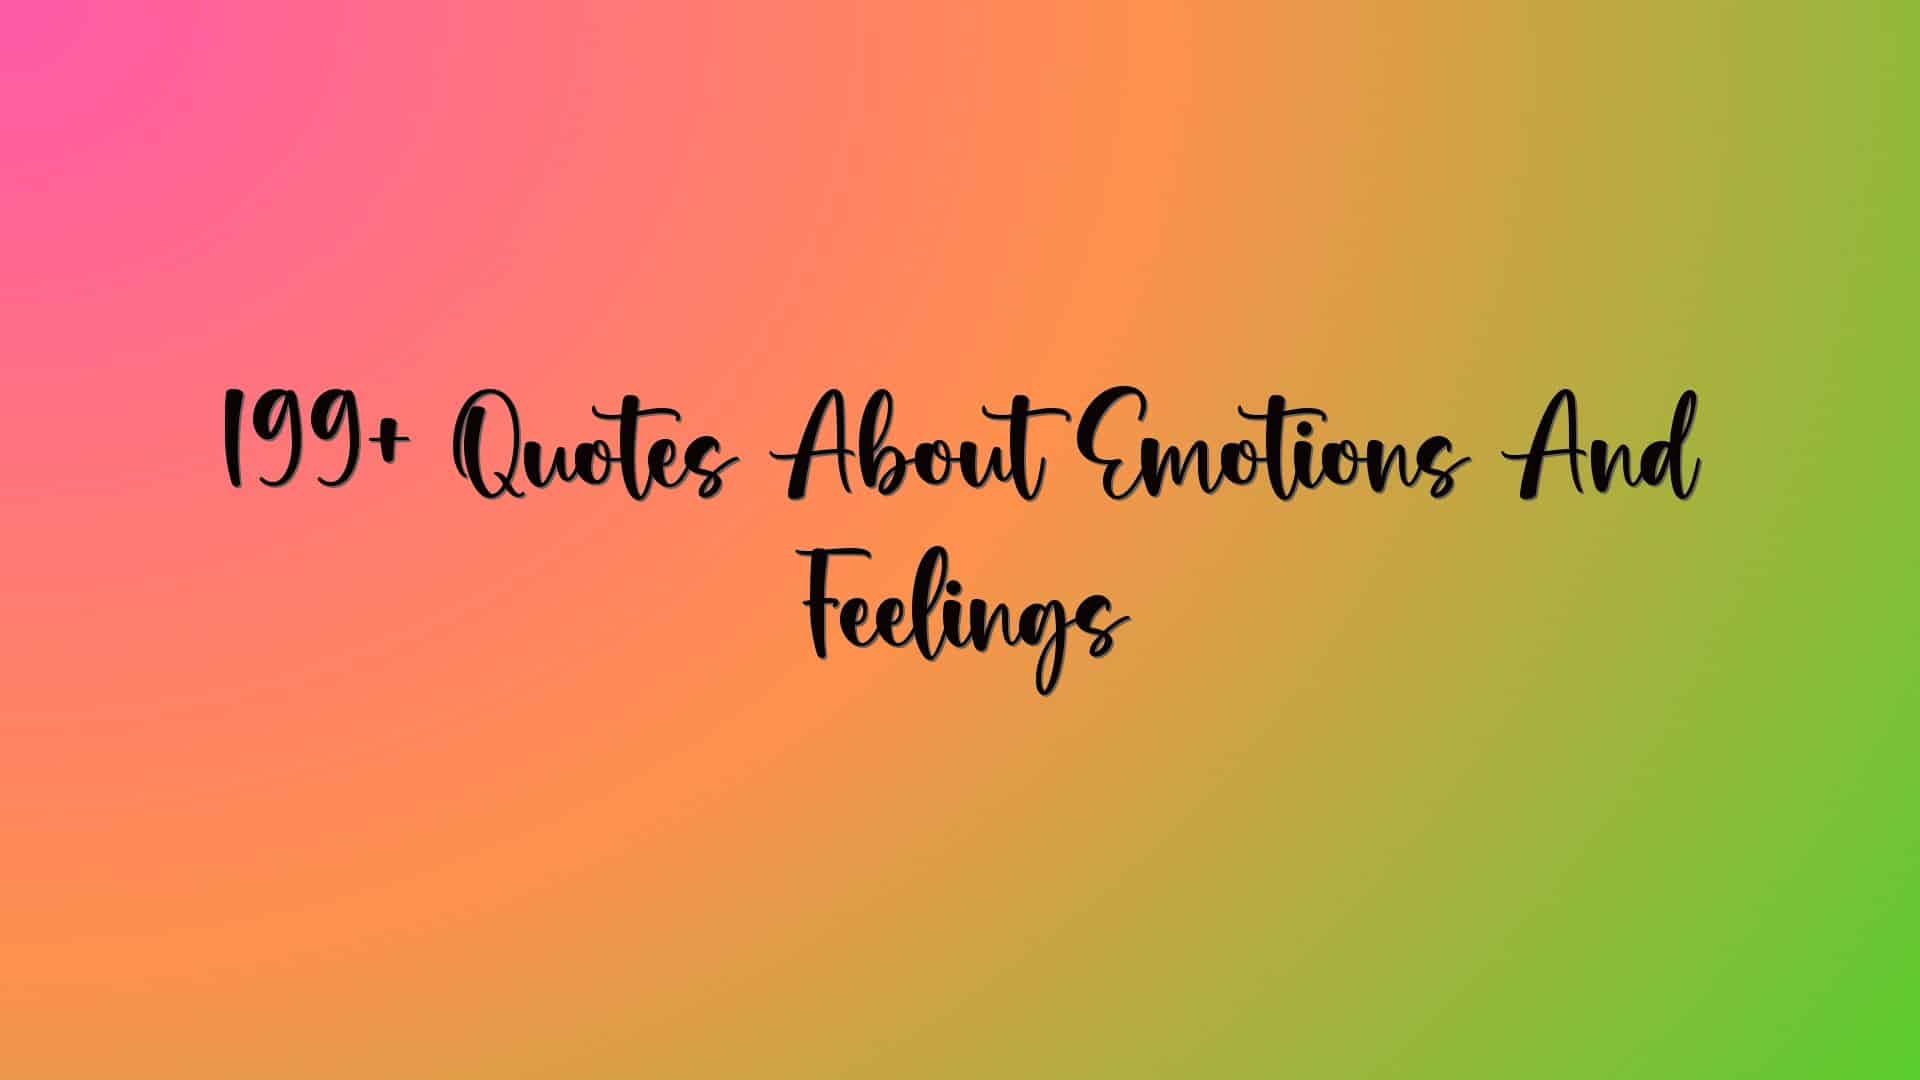 199+ Quotes About Emotions And Feelings